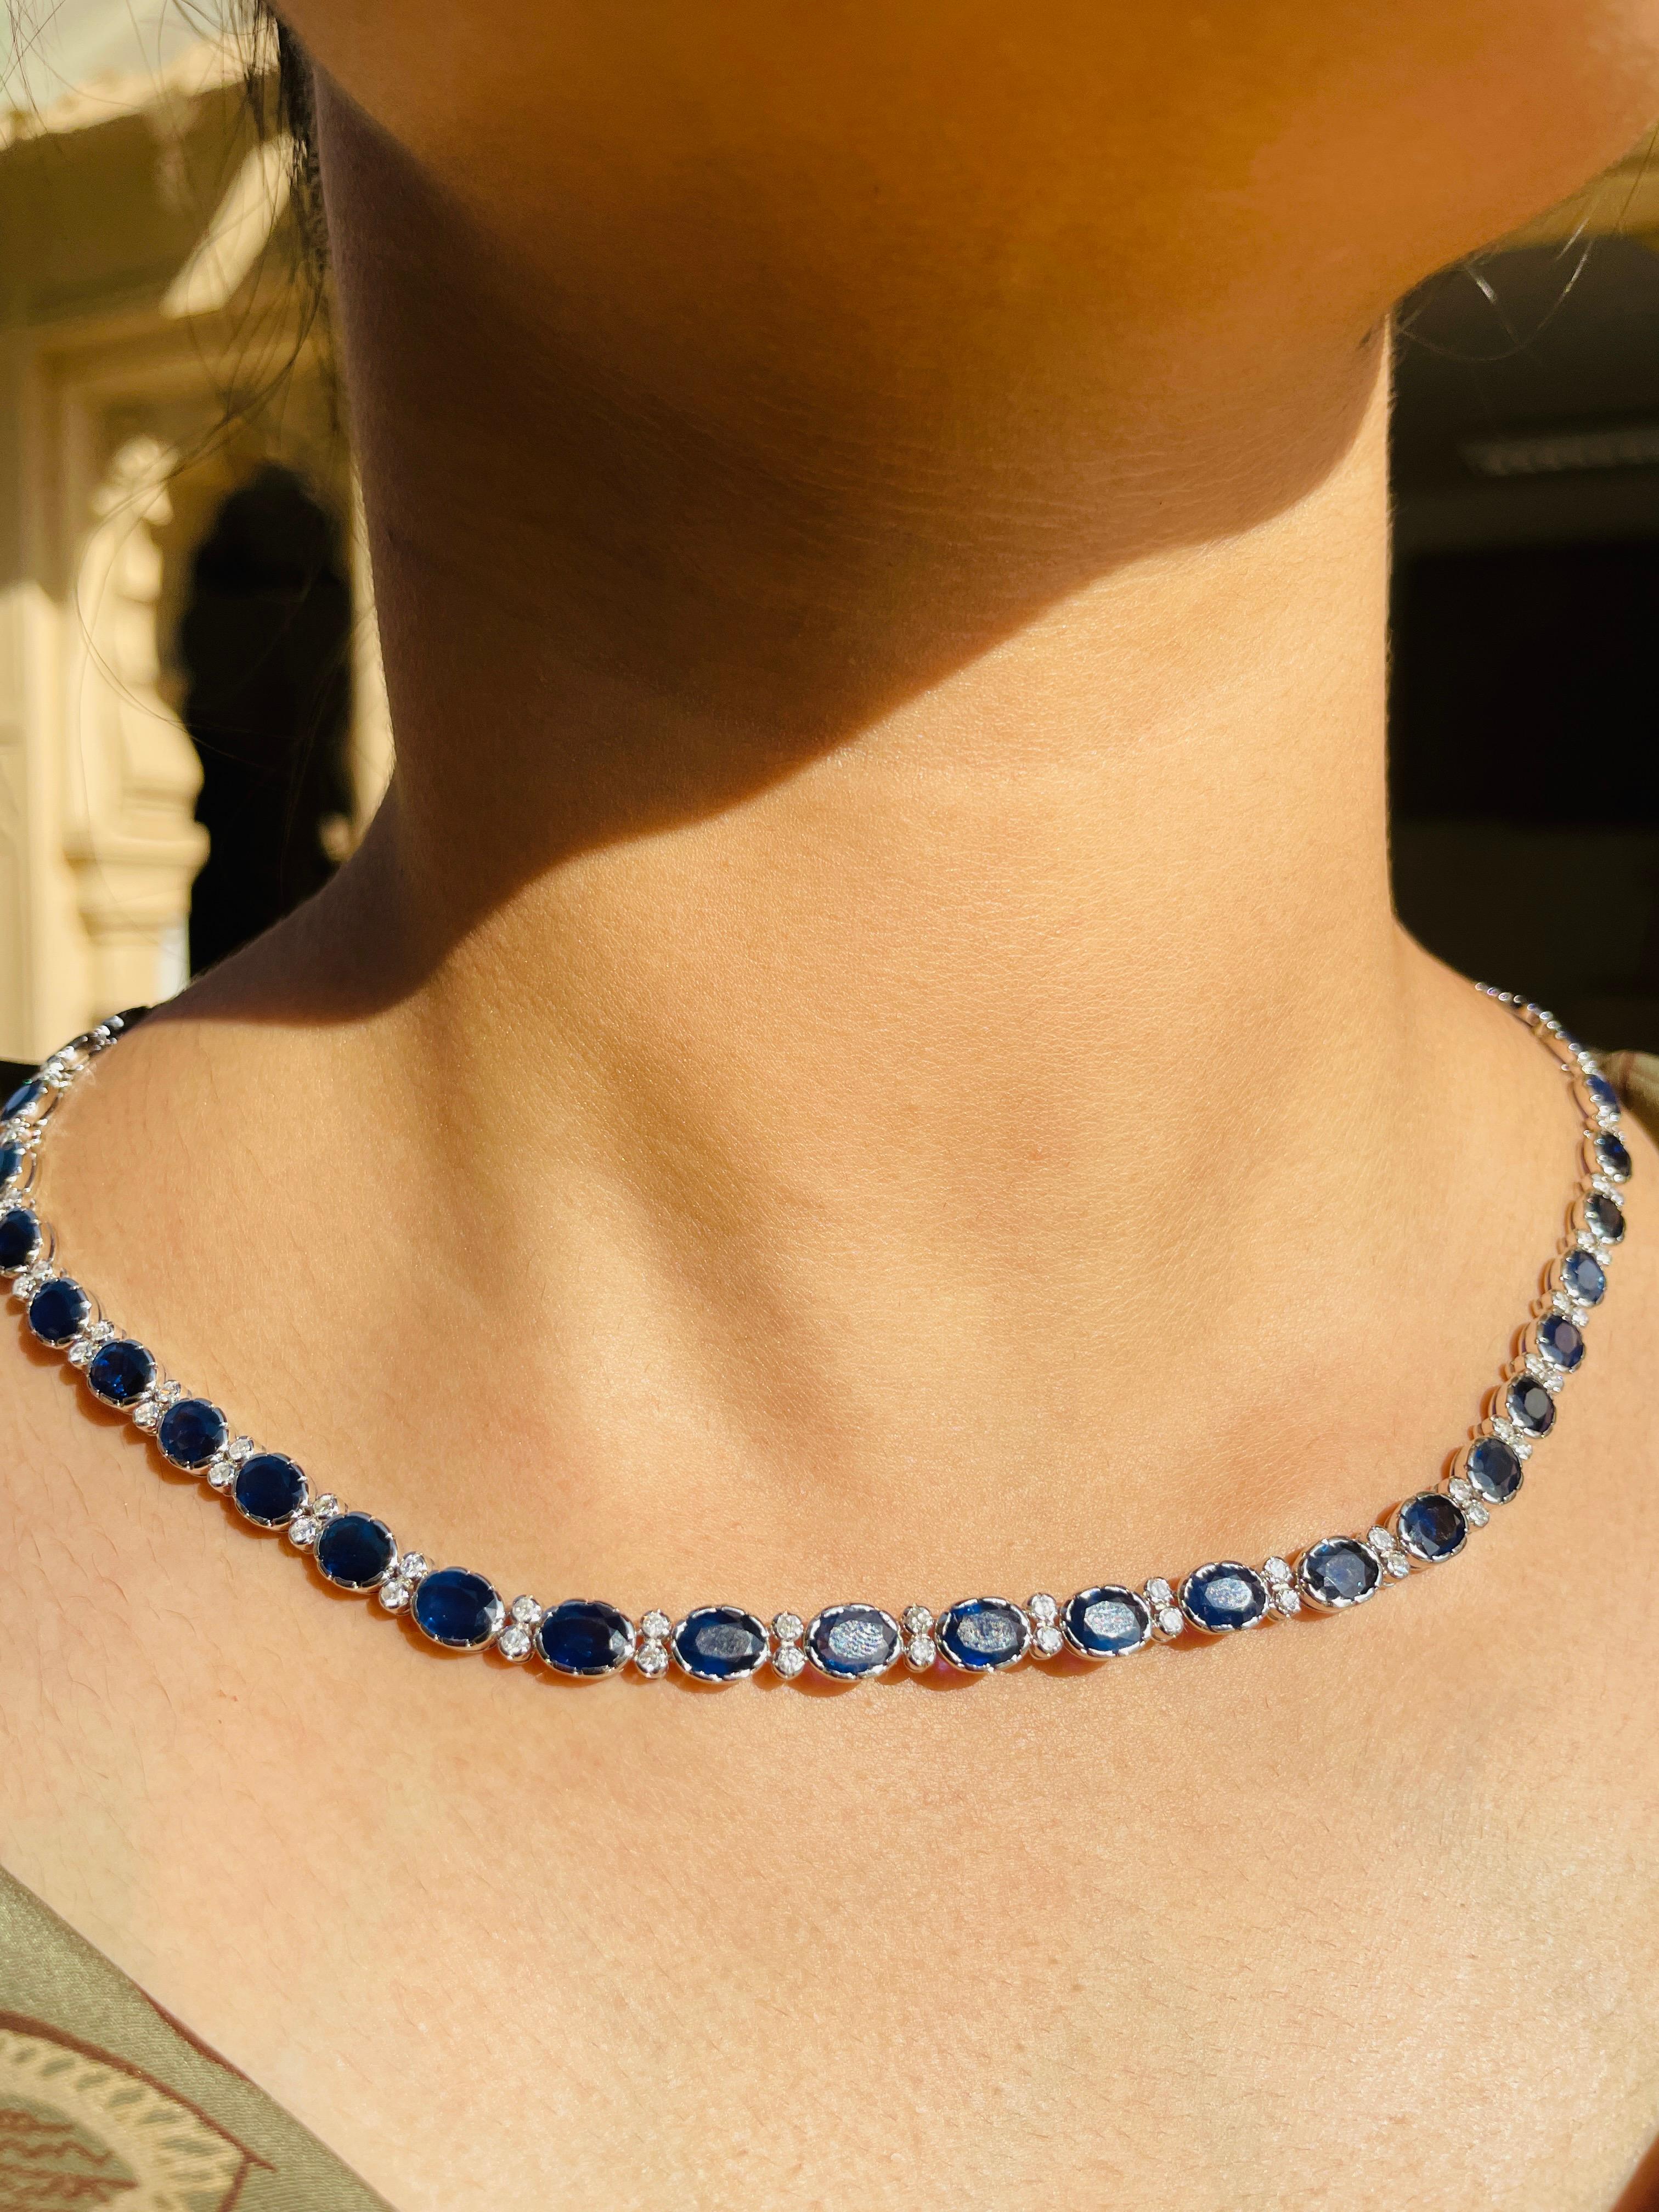 Modern Oval Shaped Blue Sapphire Necklace in 18K White Gold with Diamonds For Sale